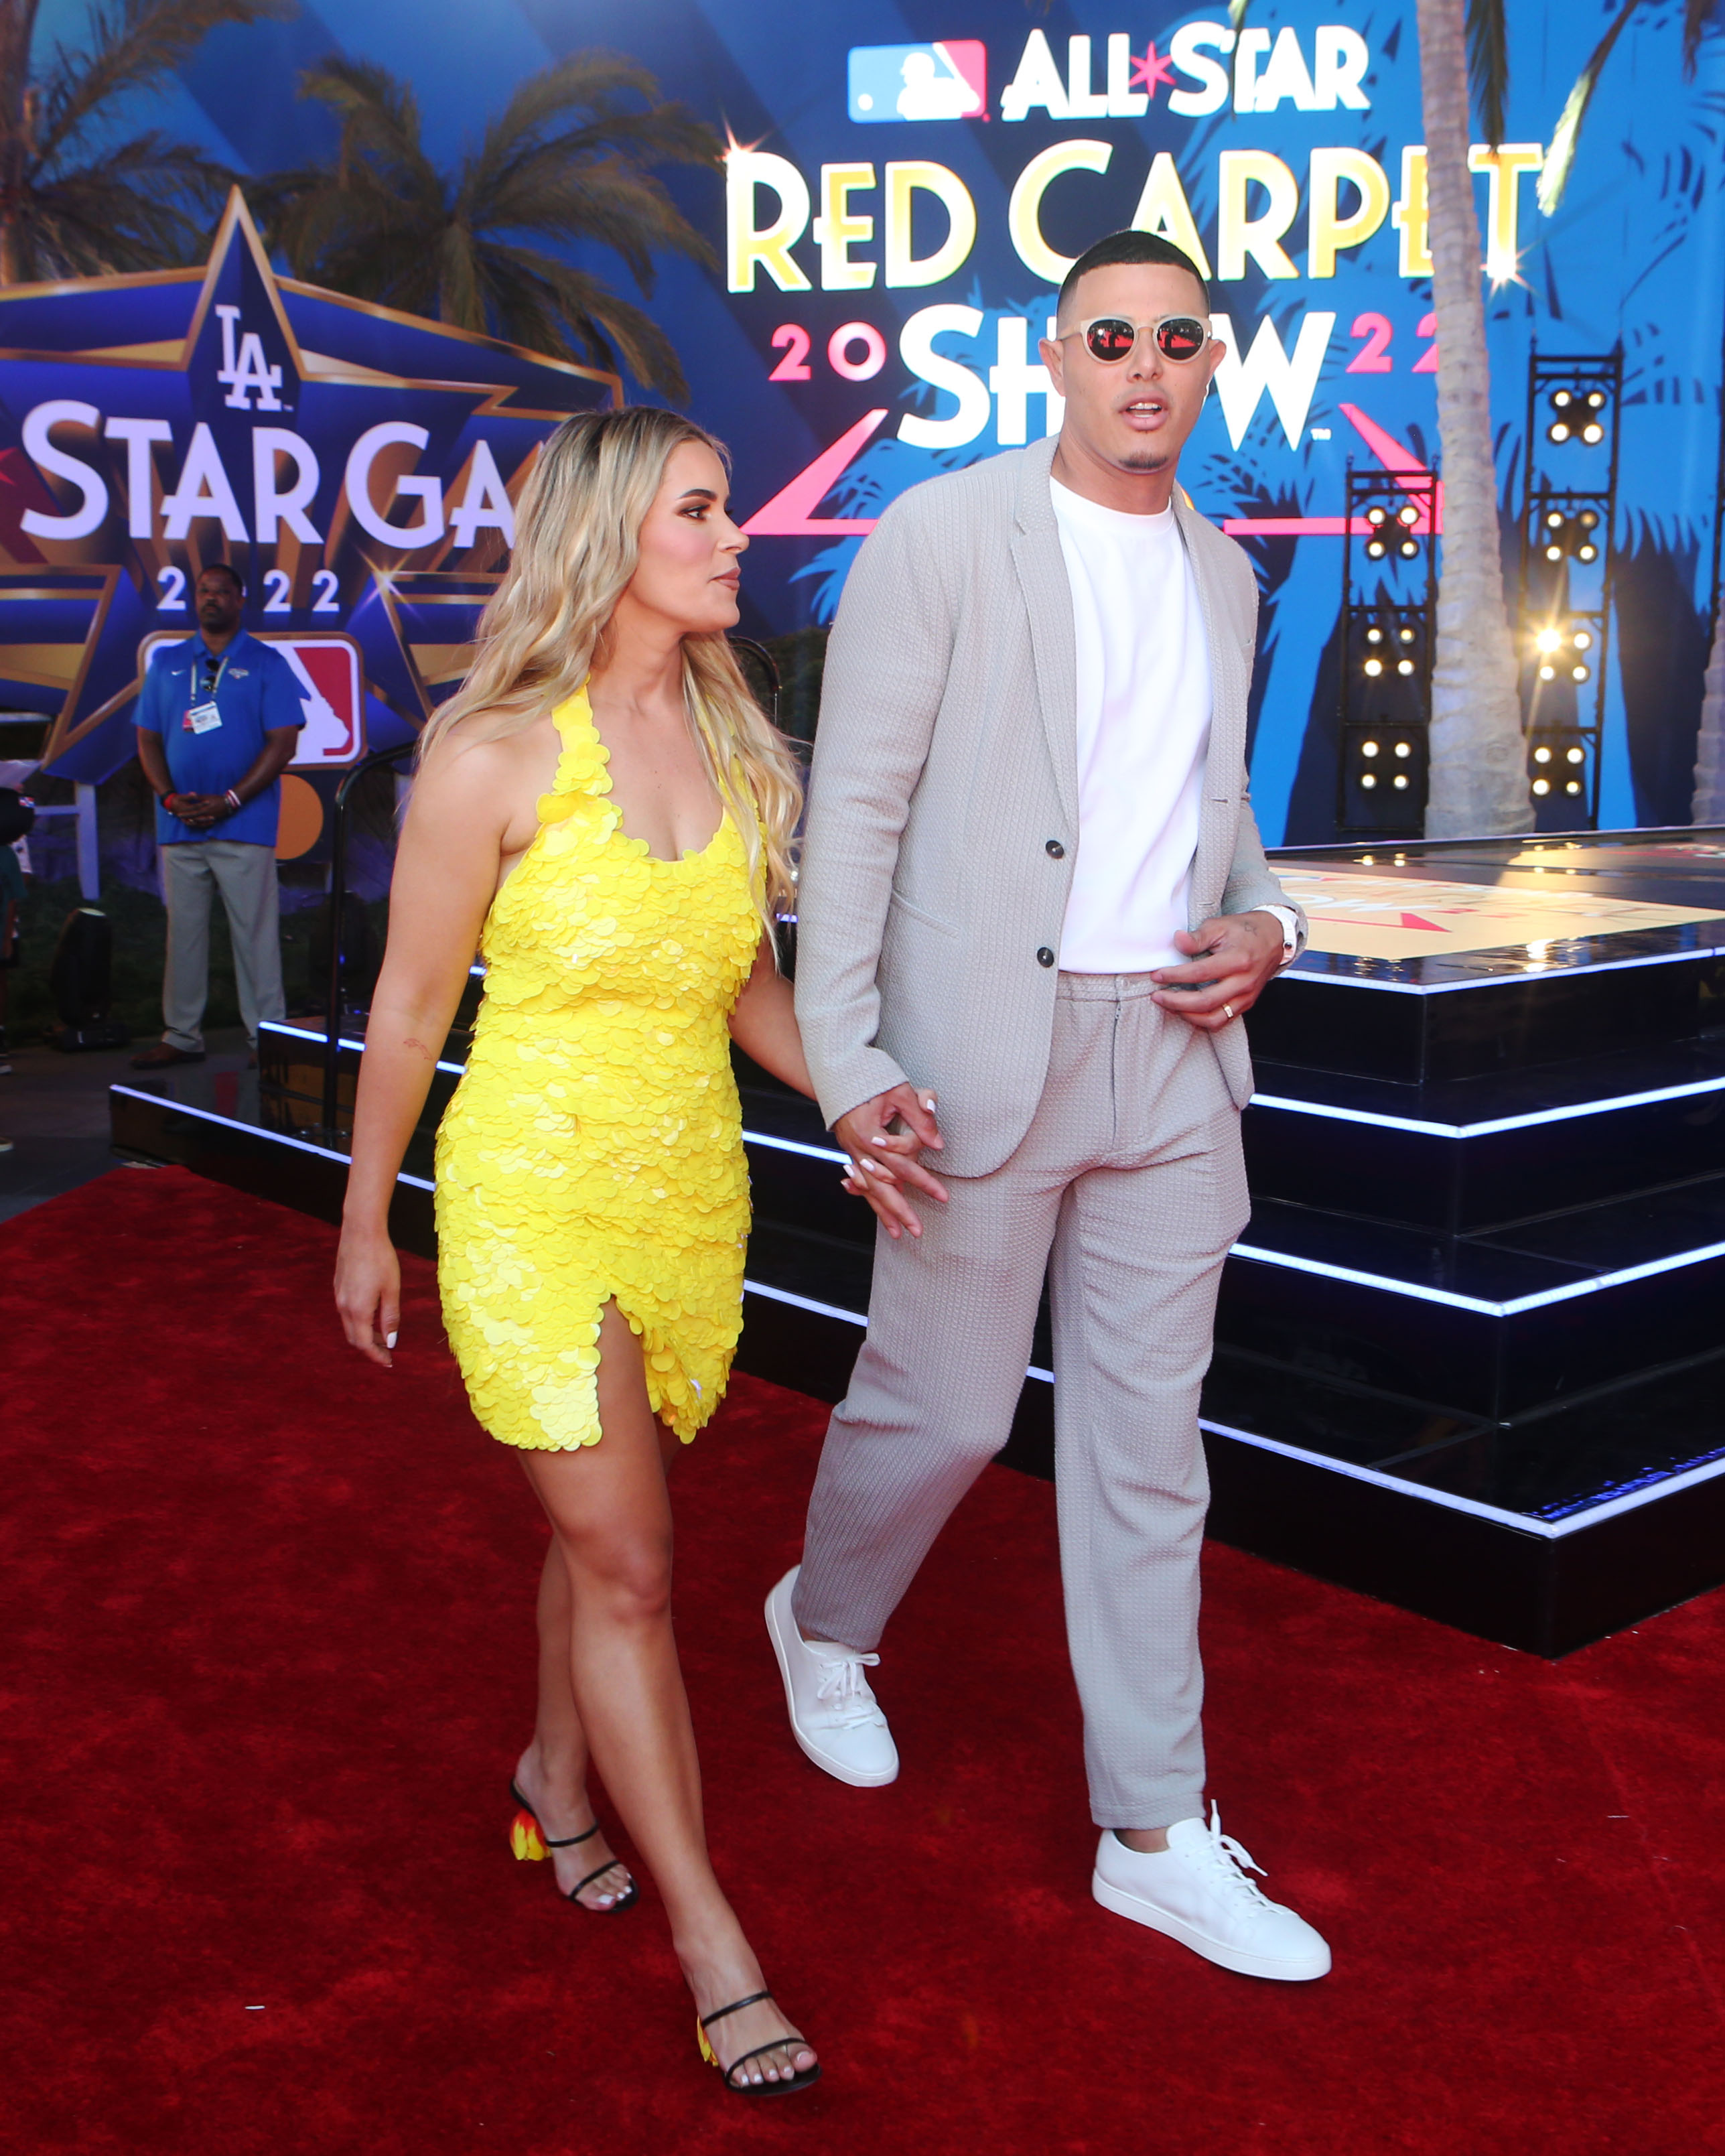 Manny Machado and Yainee Alonso during the All-Star Red Carpet Show at L.A. Live on Tuesday, July 19, 2022, in Los Angeles, California. | Source: Getty Images